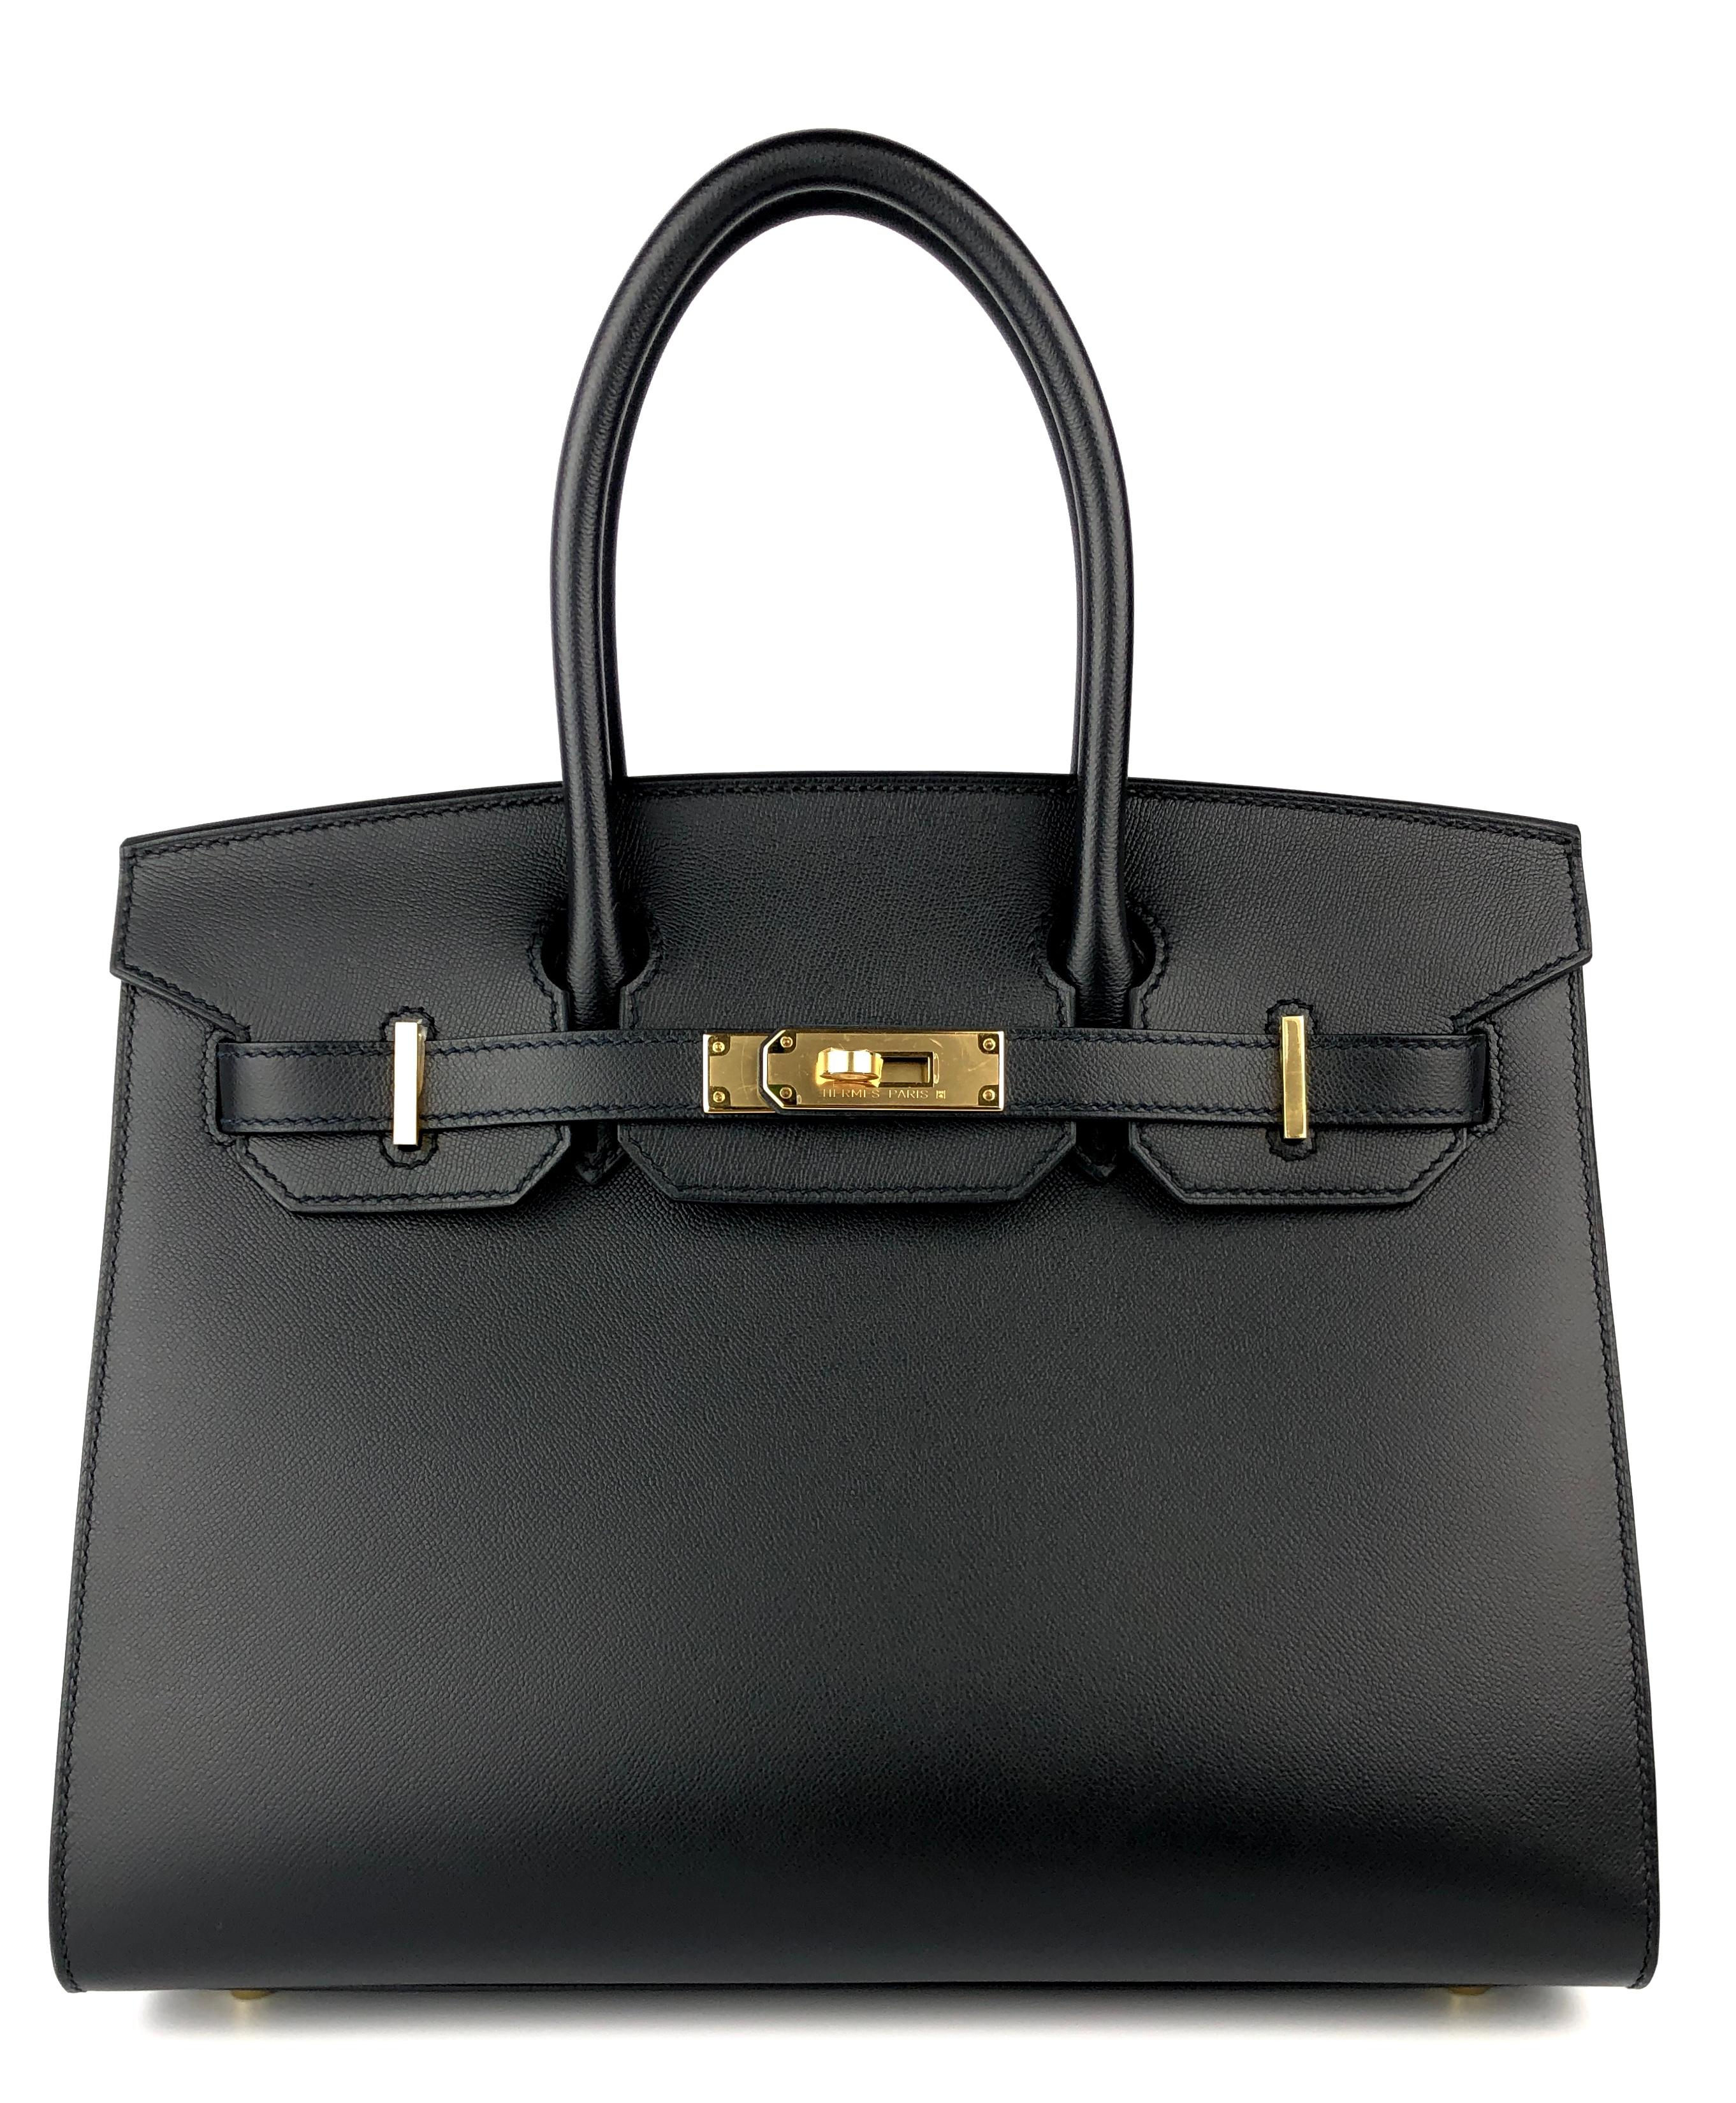 As New Absolutely Stunning Rare Limited Edition Hermes Birkin 30 Sellier Black. Complimented by Madame Leather and Gold Hardware. Y Stamp 2020. 

Shop with Confidence from Lux Addicts. Authenticity Guaranteed! 

Lux Addicts is a Premier Luxury